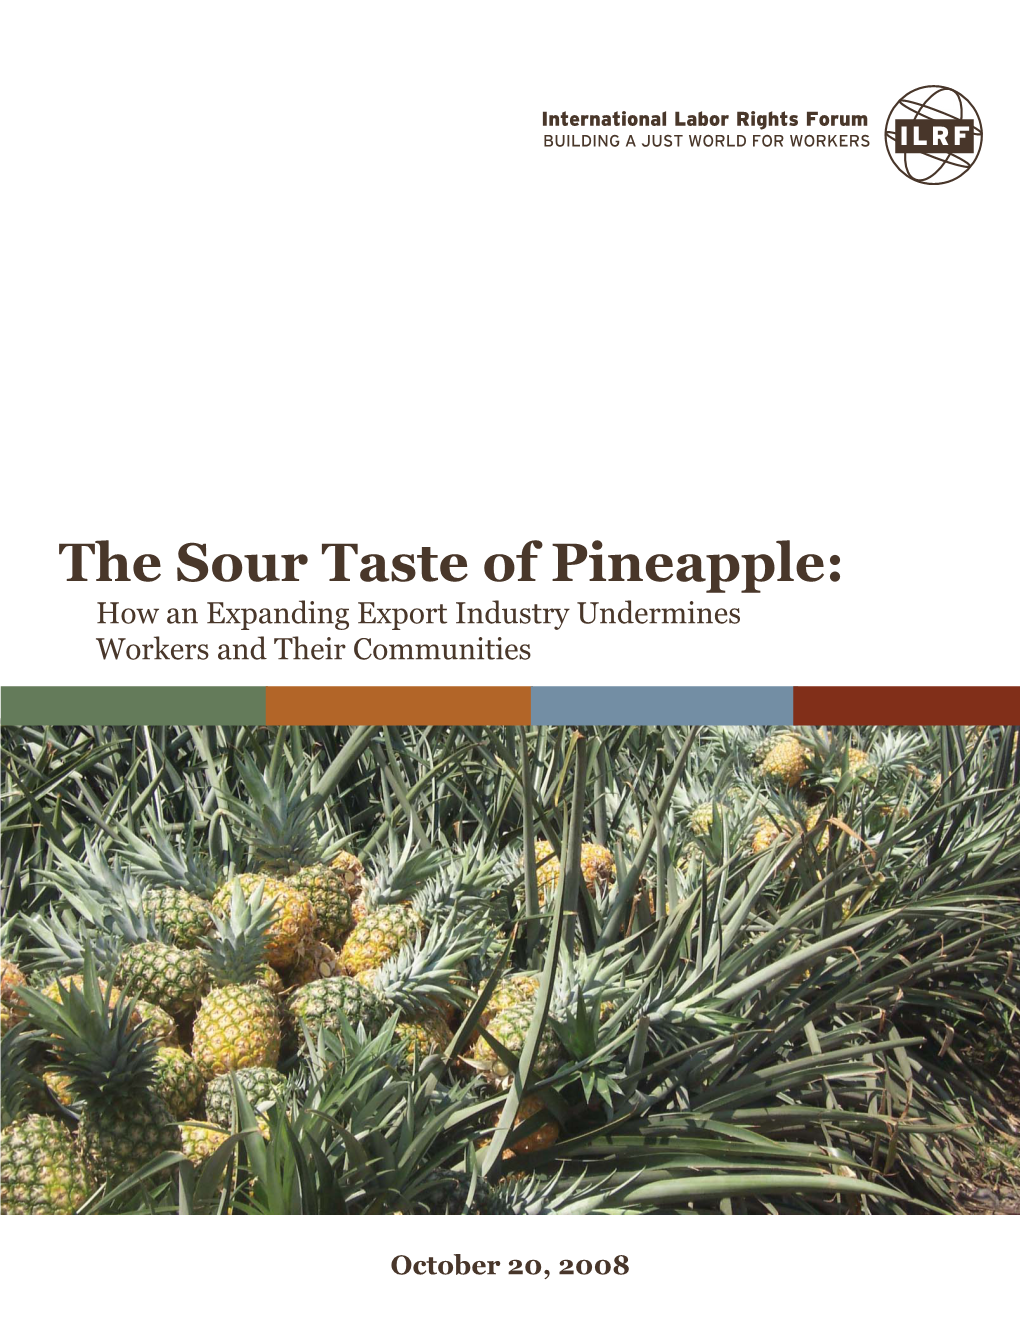 The Sour Taste of Pineapple: How an Expanding Export Industry Undermines Workers and Their Communities